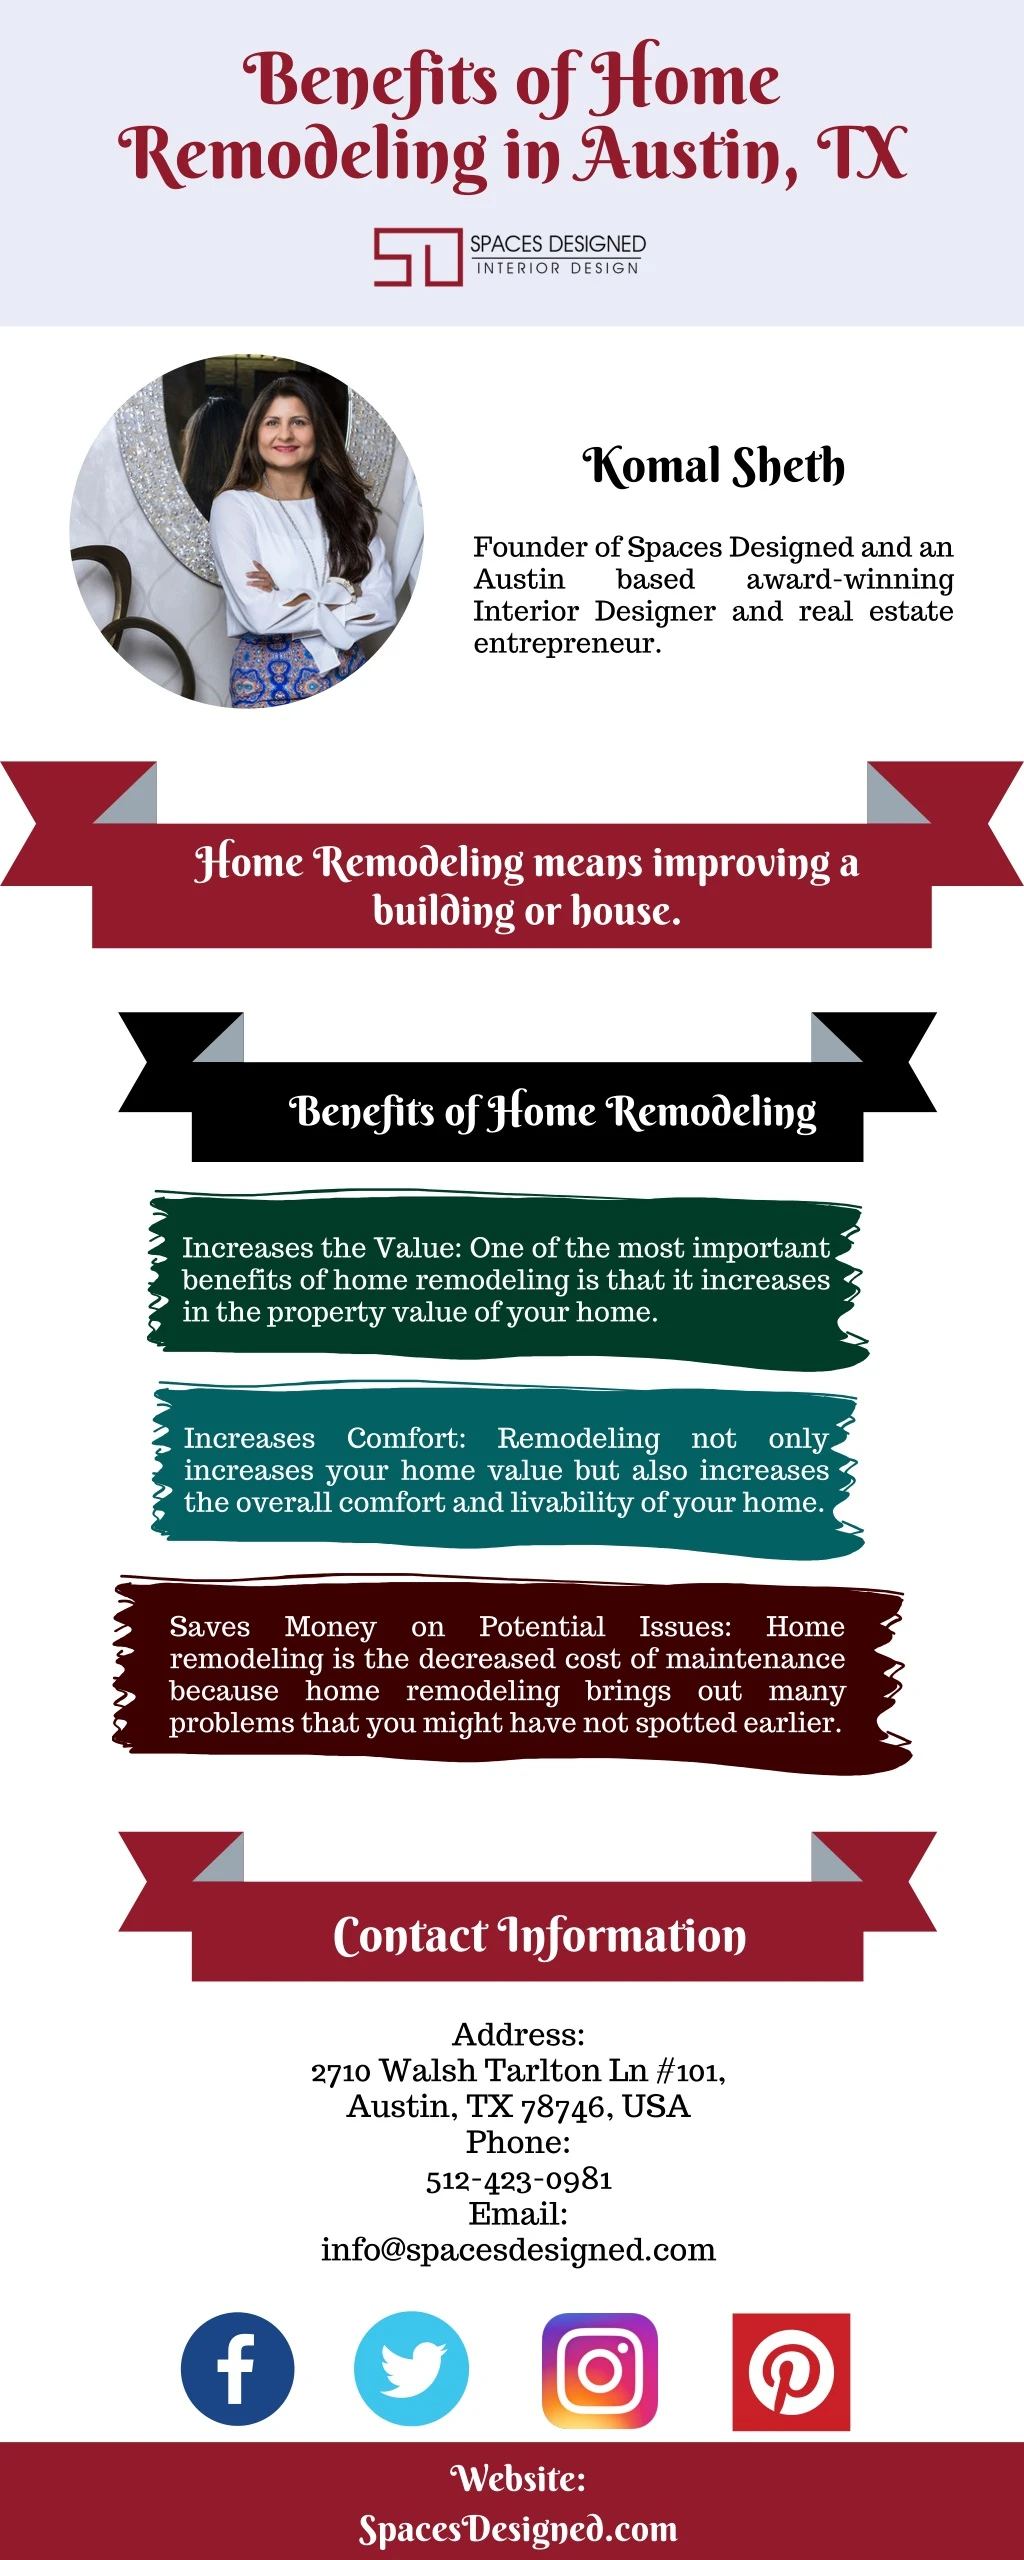 benefits of home remodeling in austin tx